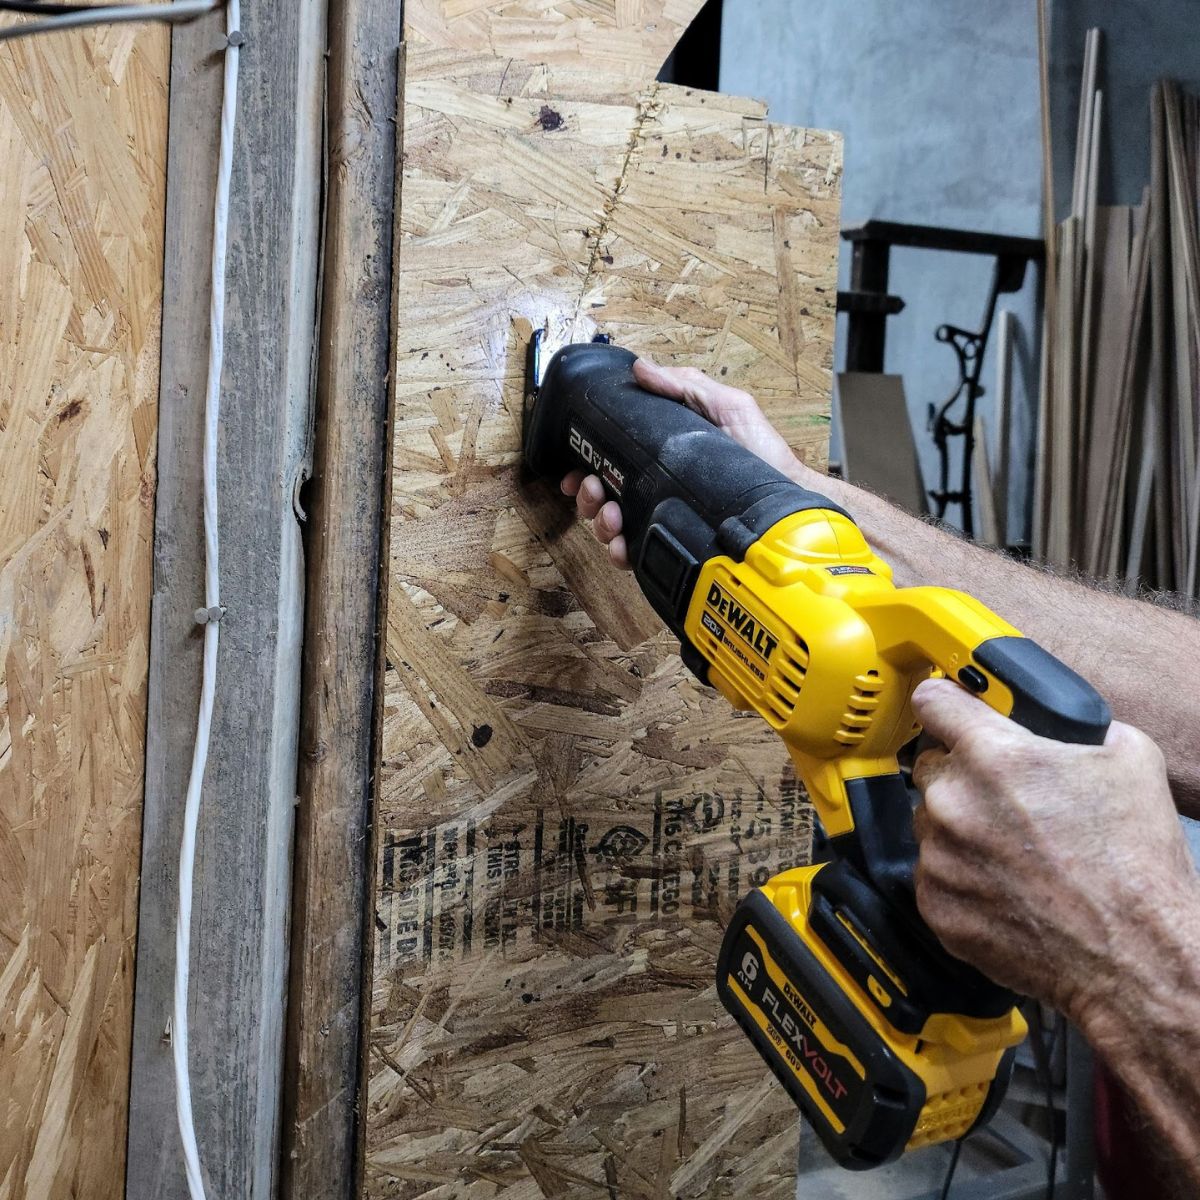 The Best Cordless Reciprocating Saws Option: DeWalt 20V MAX Cordless Reciprocating Saw